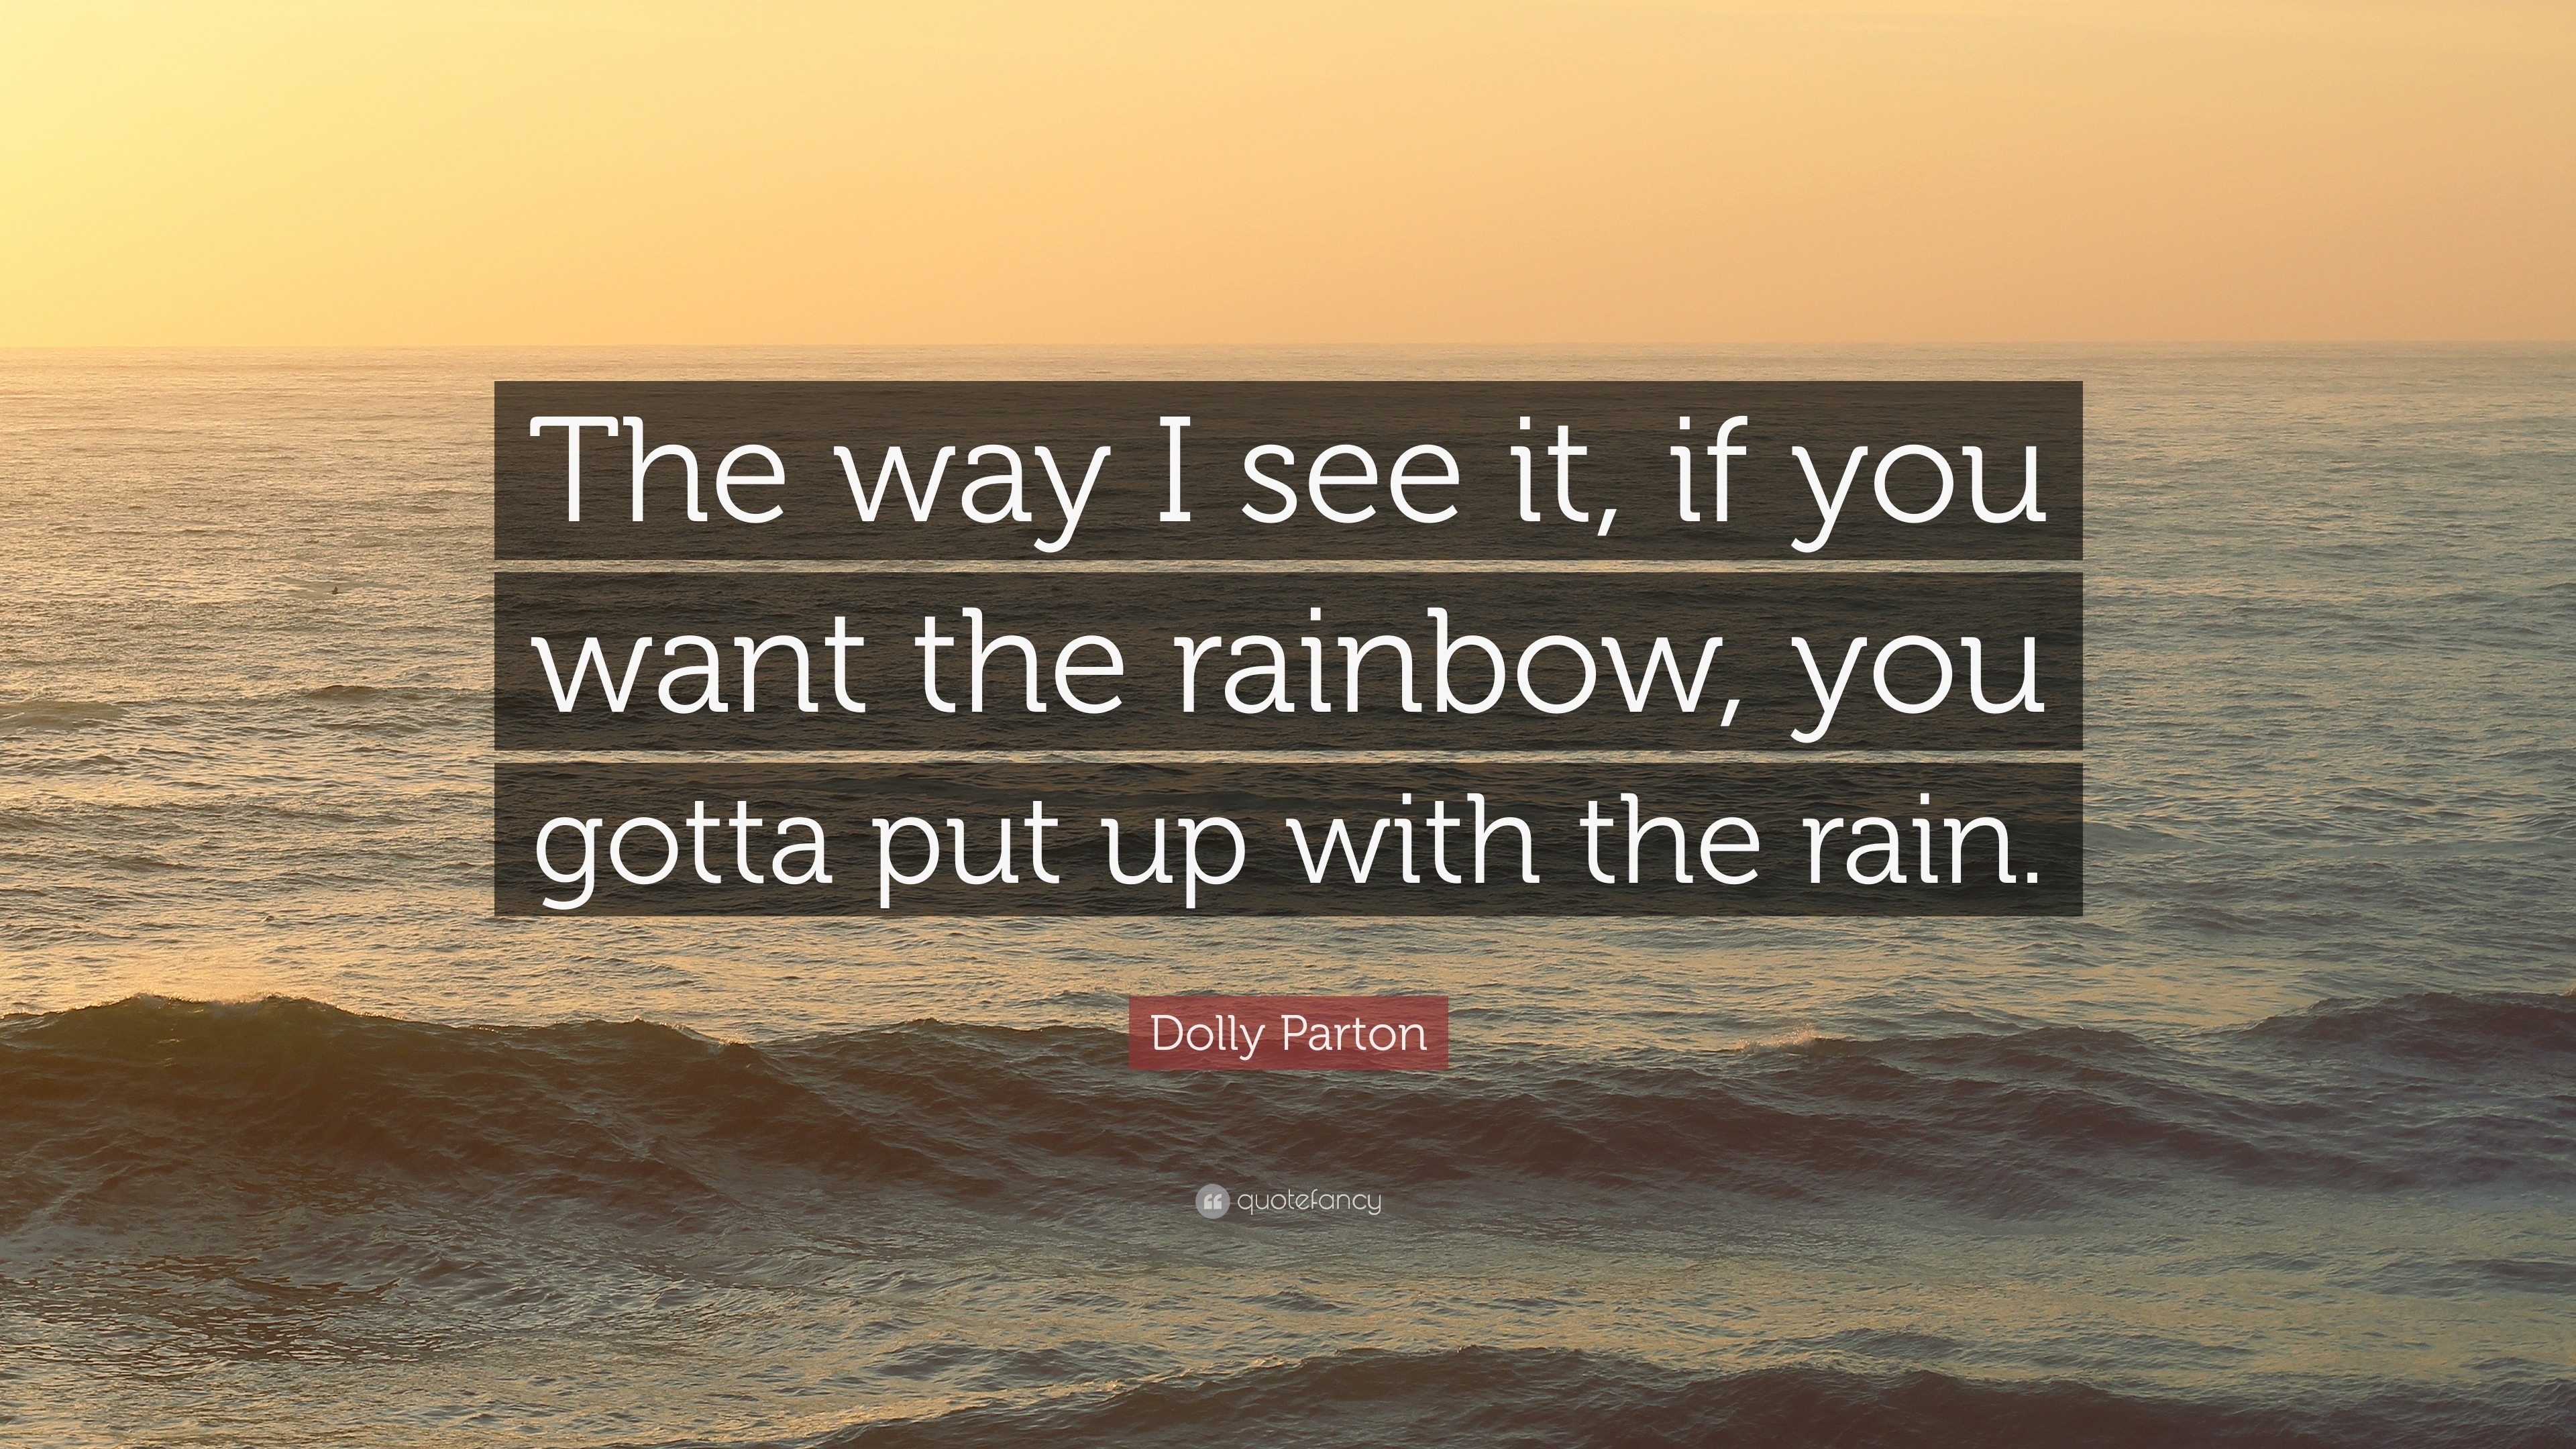 Dolly Parton Quote “the Way I See It If You Want The